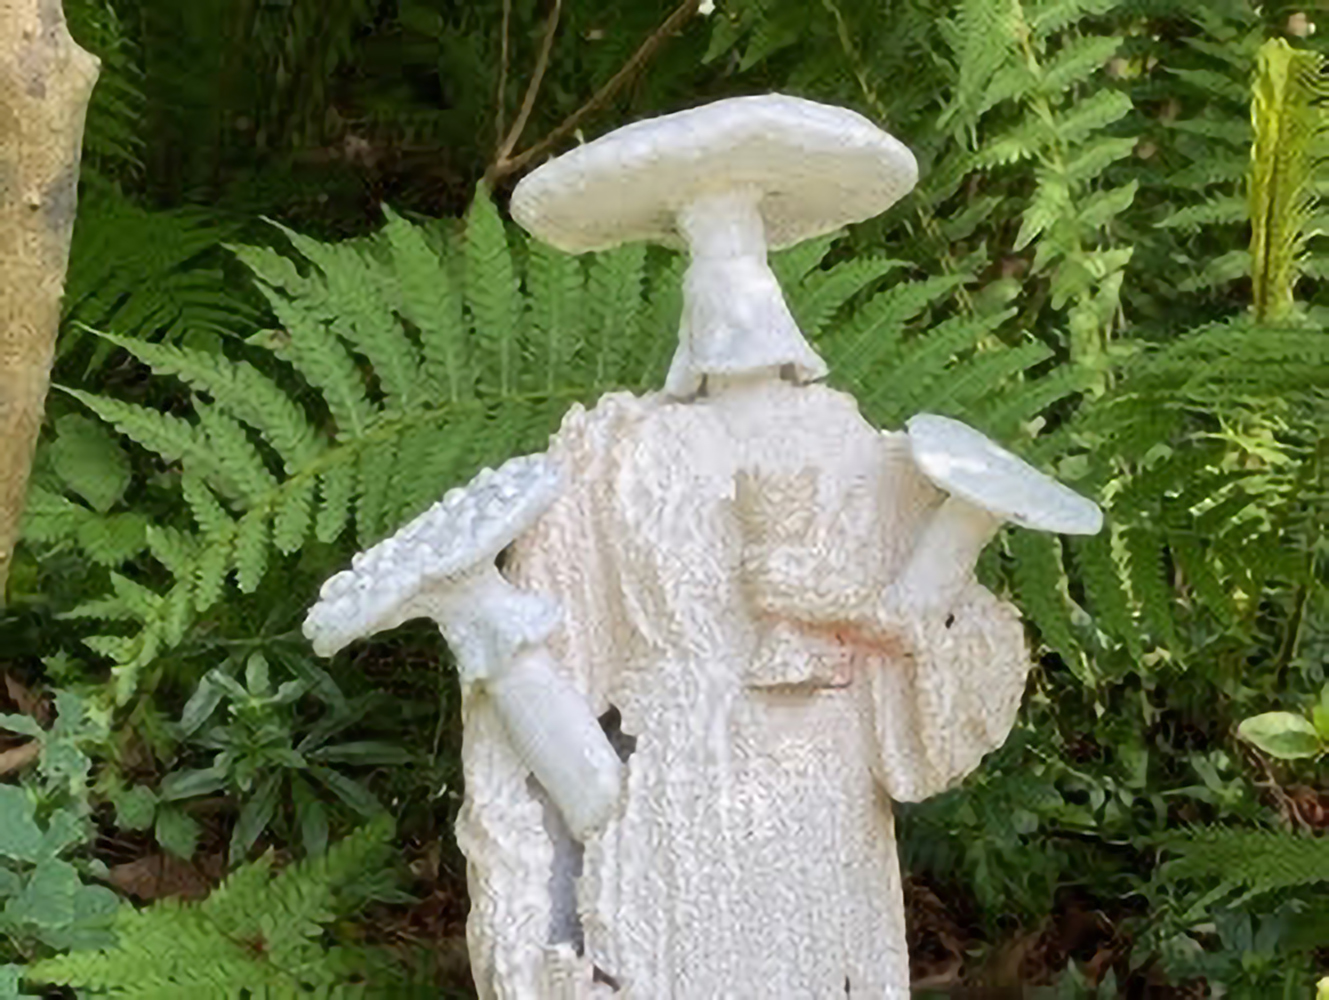 "Holy Amanita" by Scott Bluedorn, as part of the Art Foray II of the LongHouse Reserve